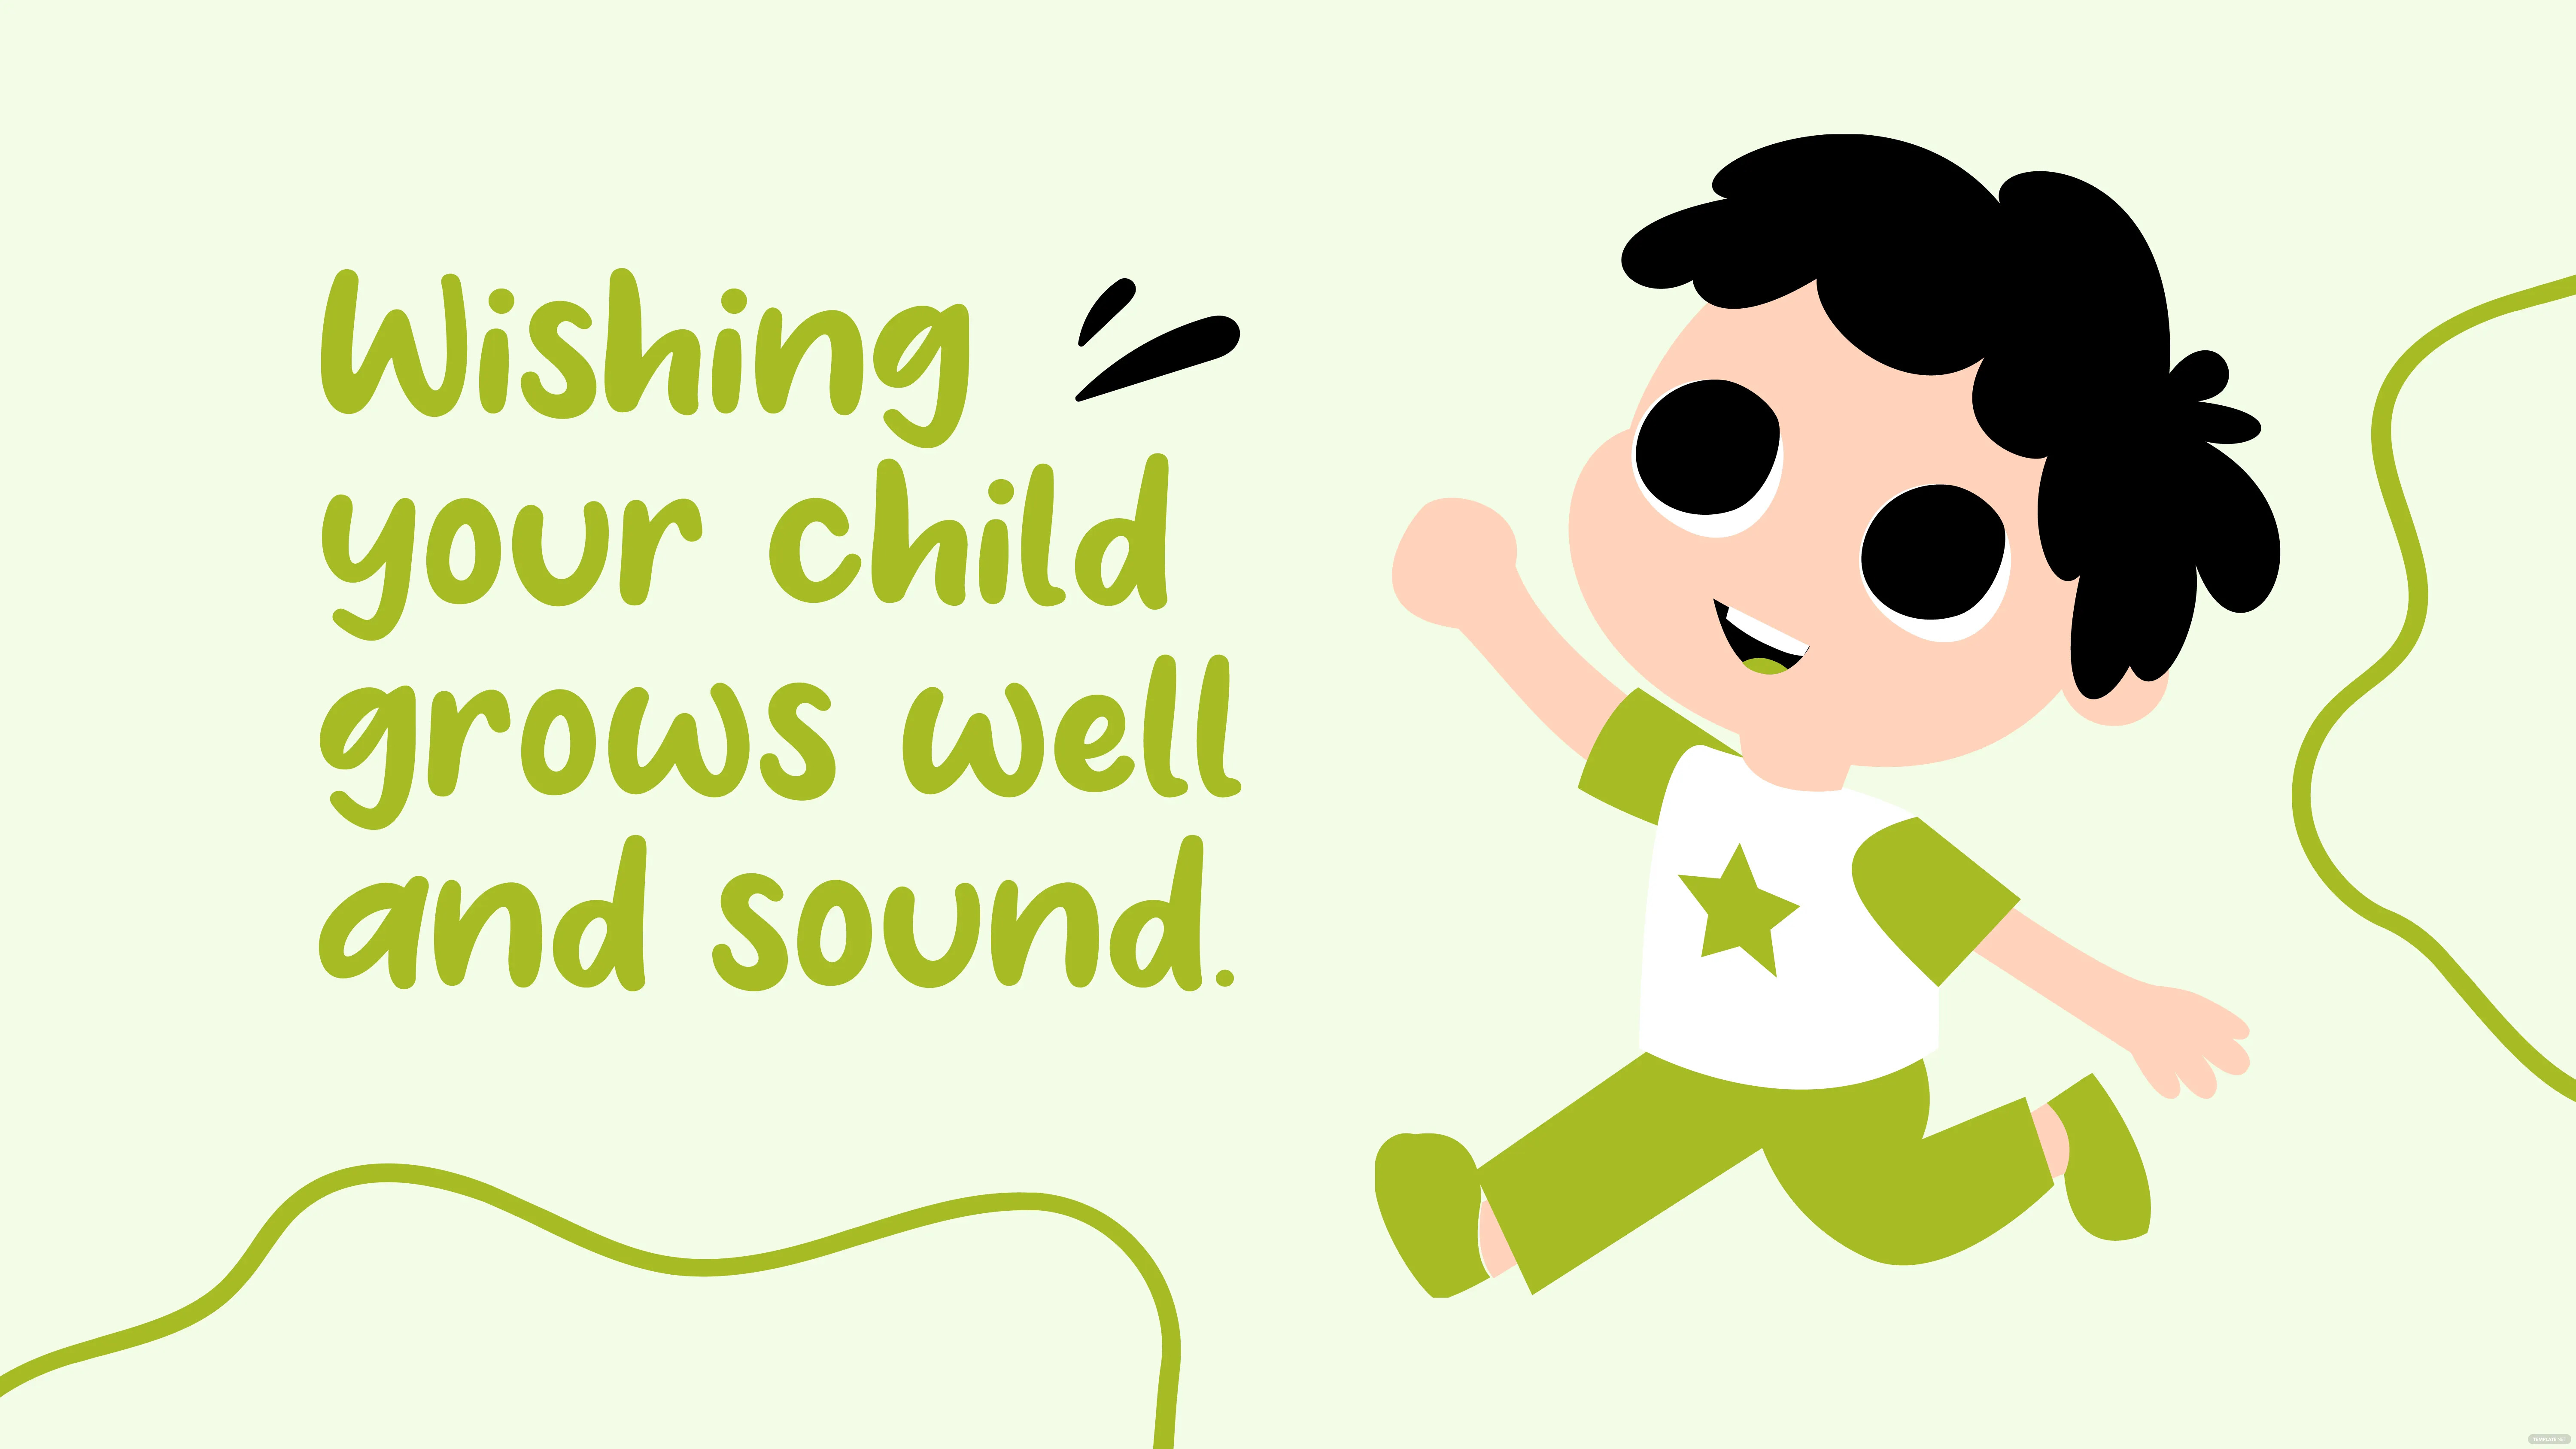 child health day wishes background ideas examples